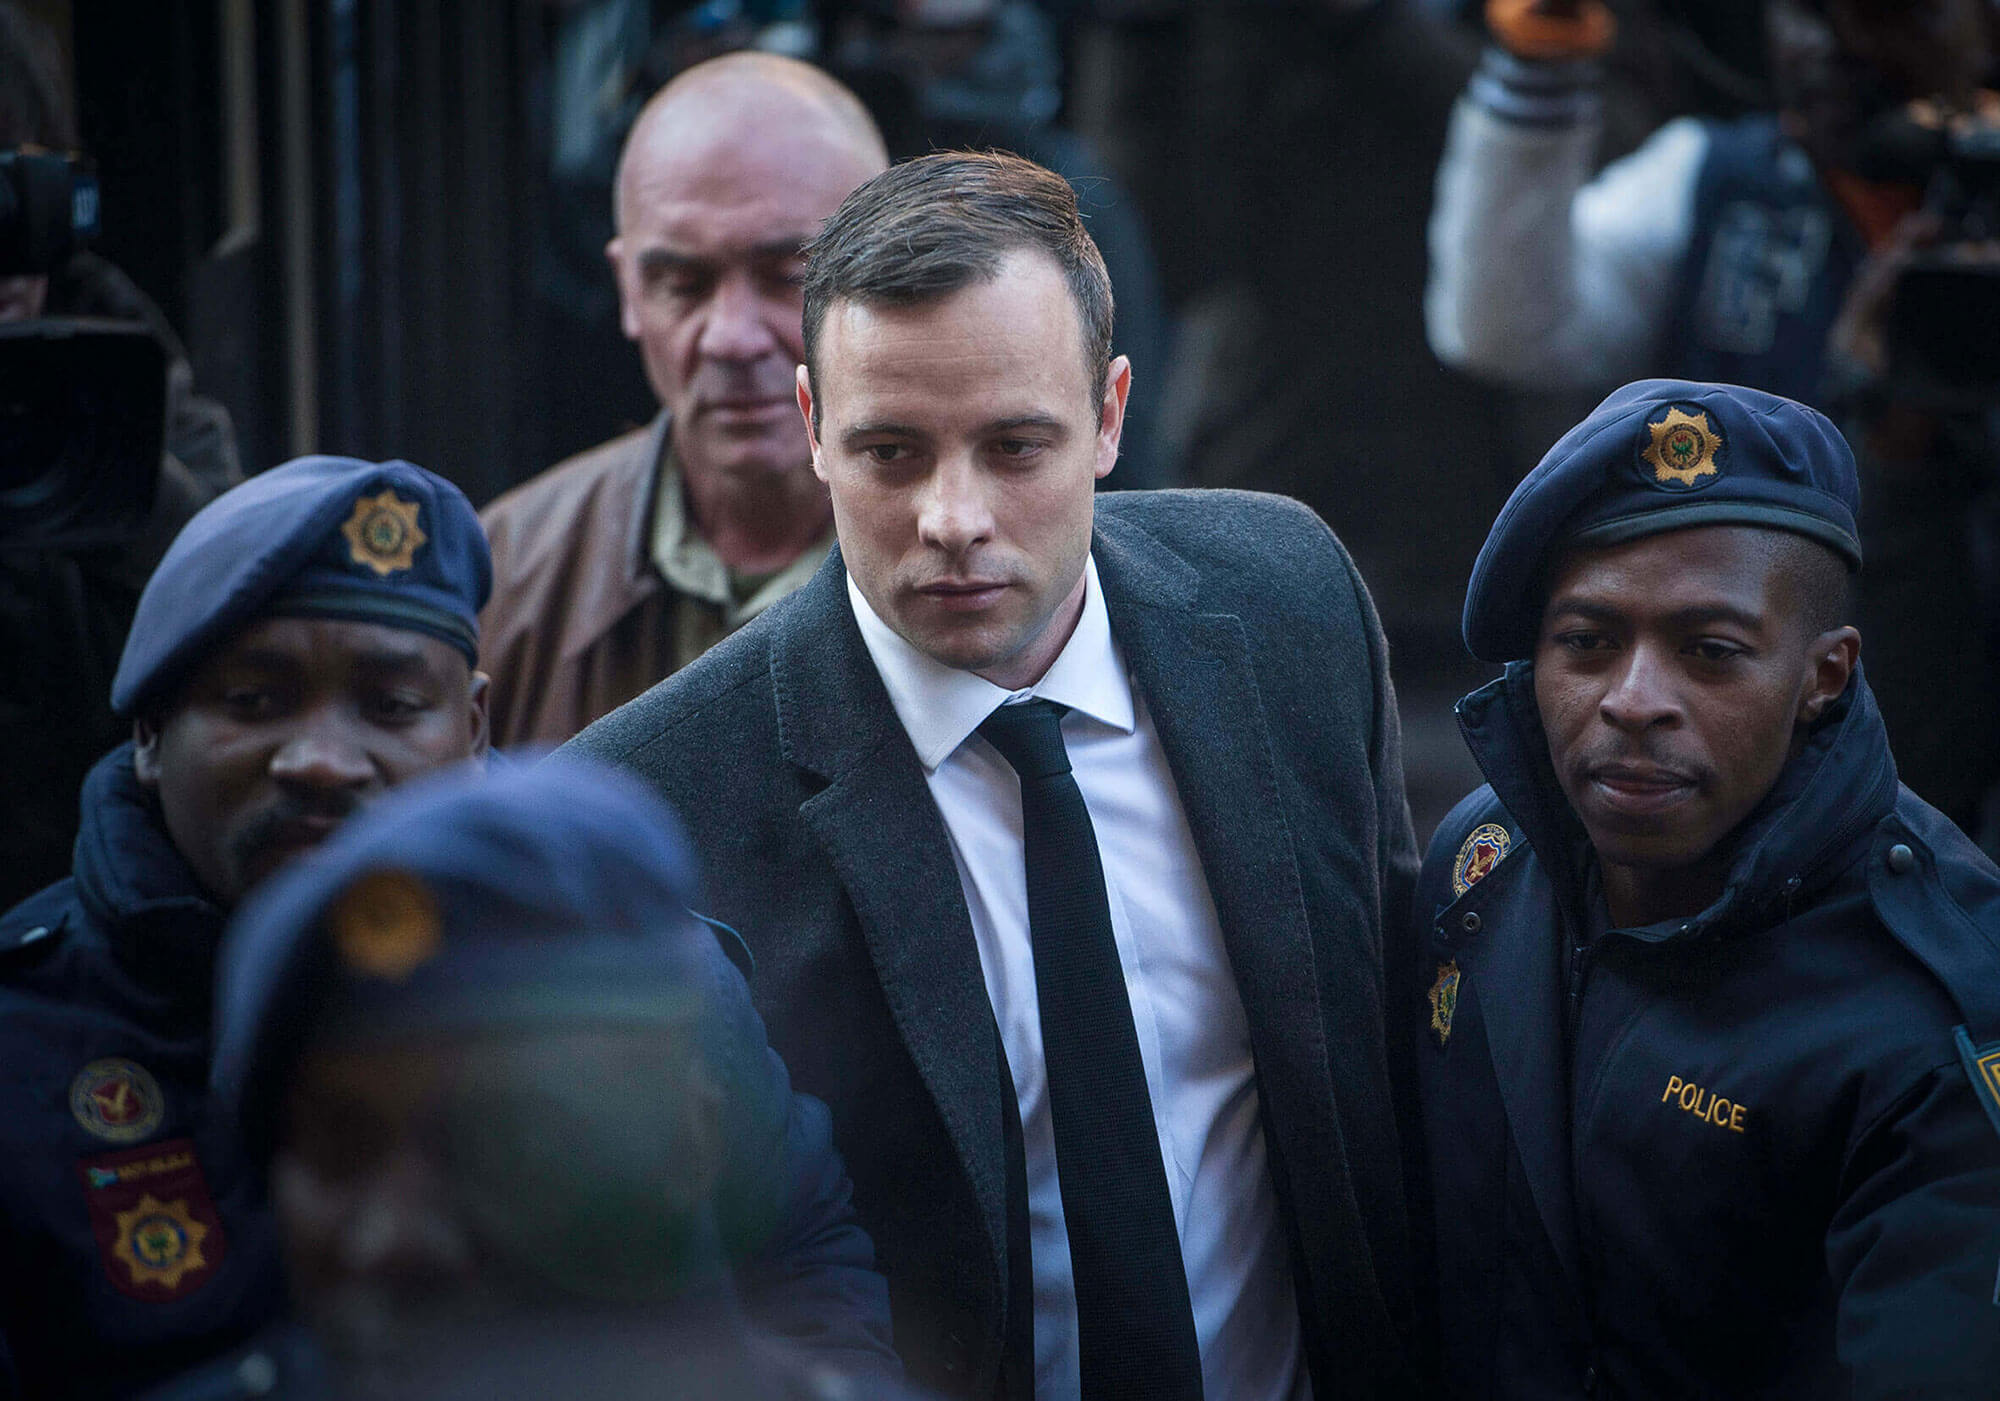 image of Oscar Pistorius arriving at High Court